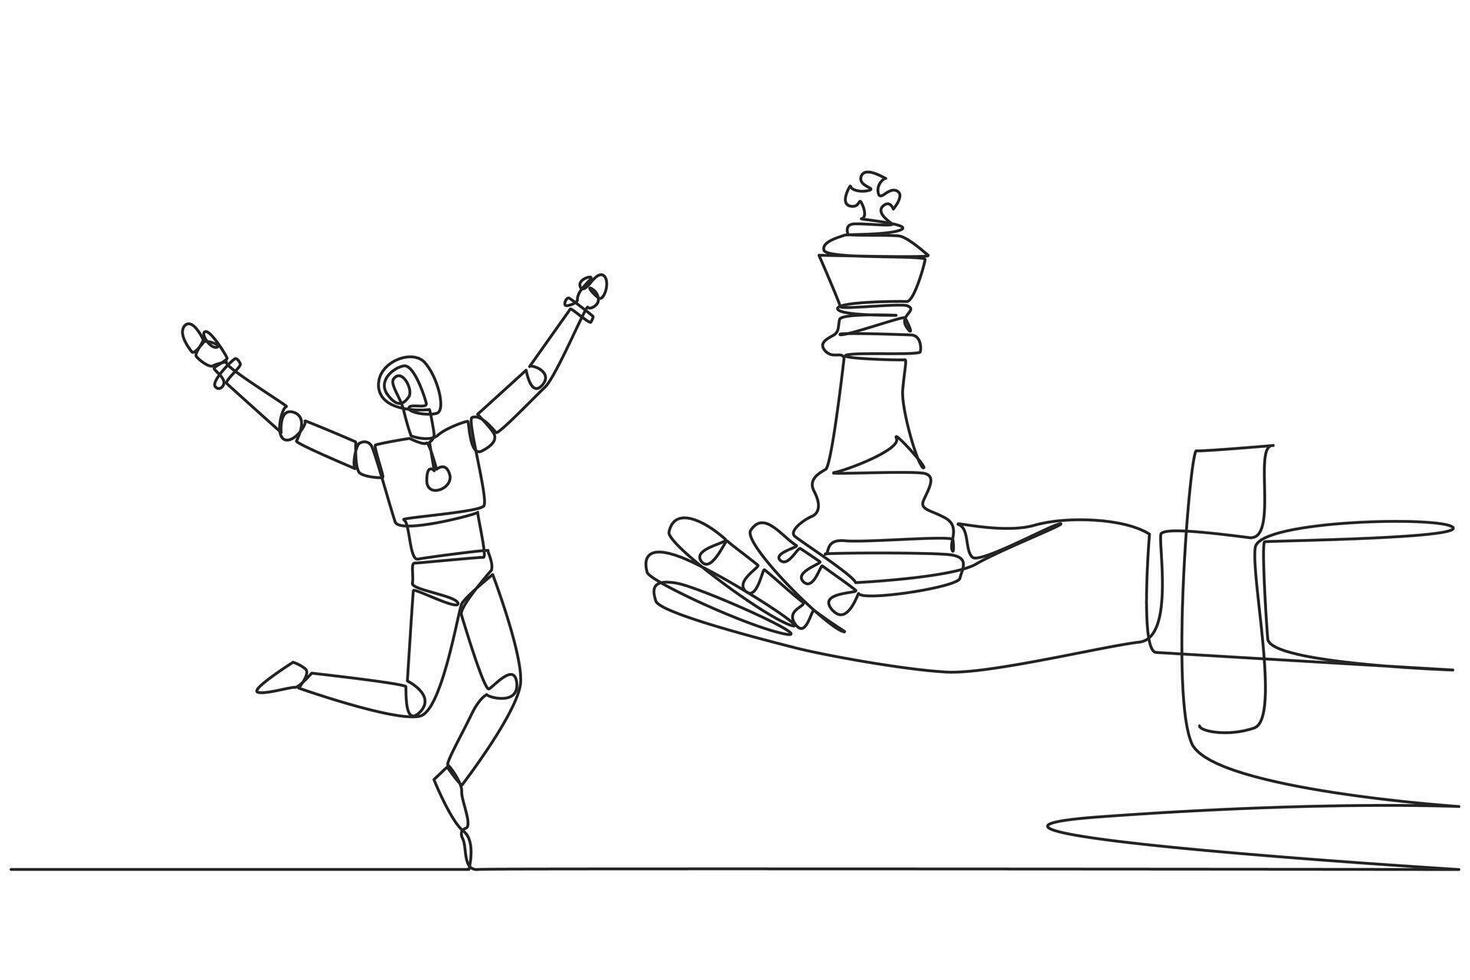 Continuous one line drawing a robot excited to get king's chess piece from giant hand. Get the best support system to become a reliable robot. Future tech. Single line draw design illustration vector